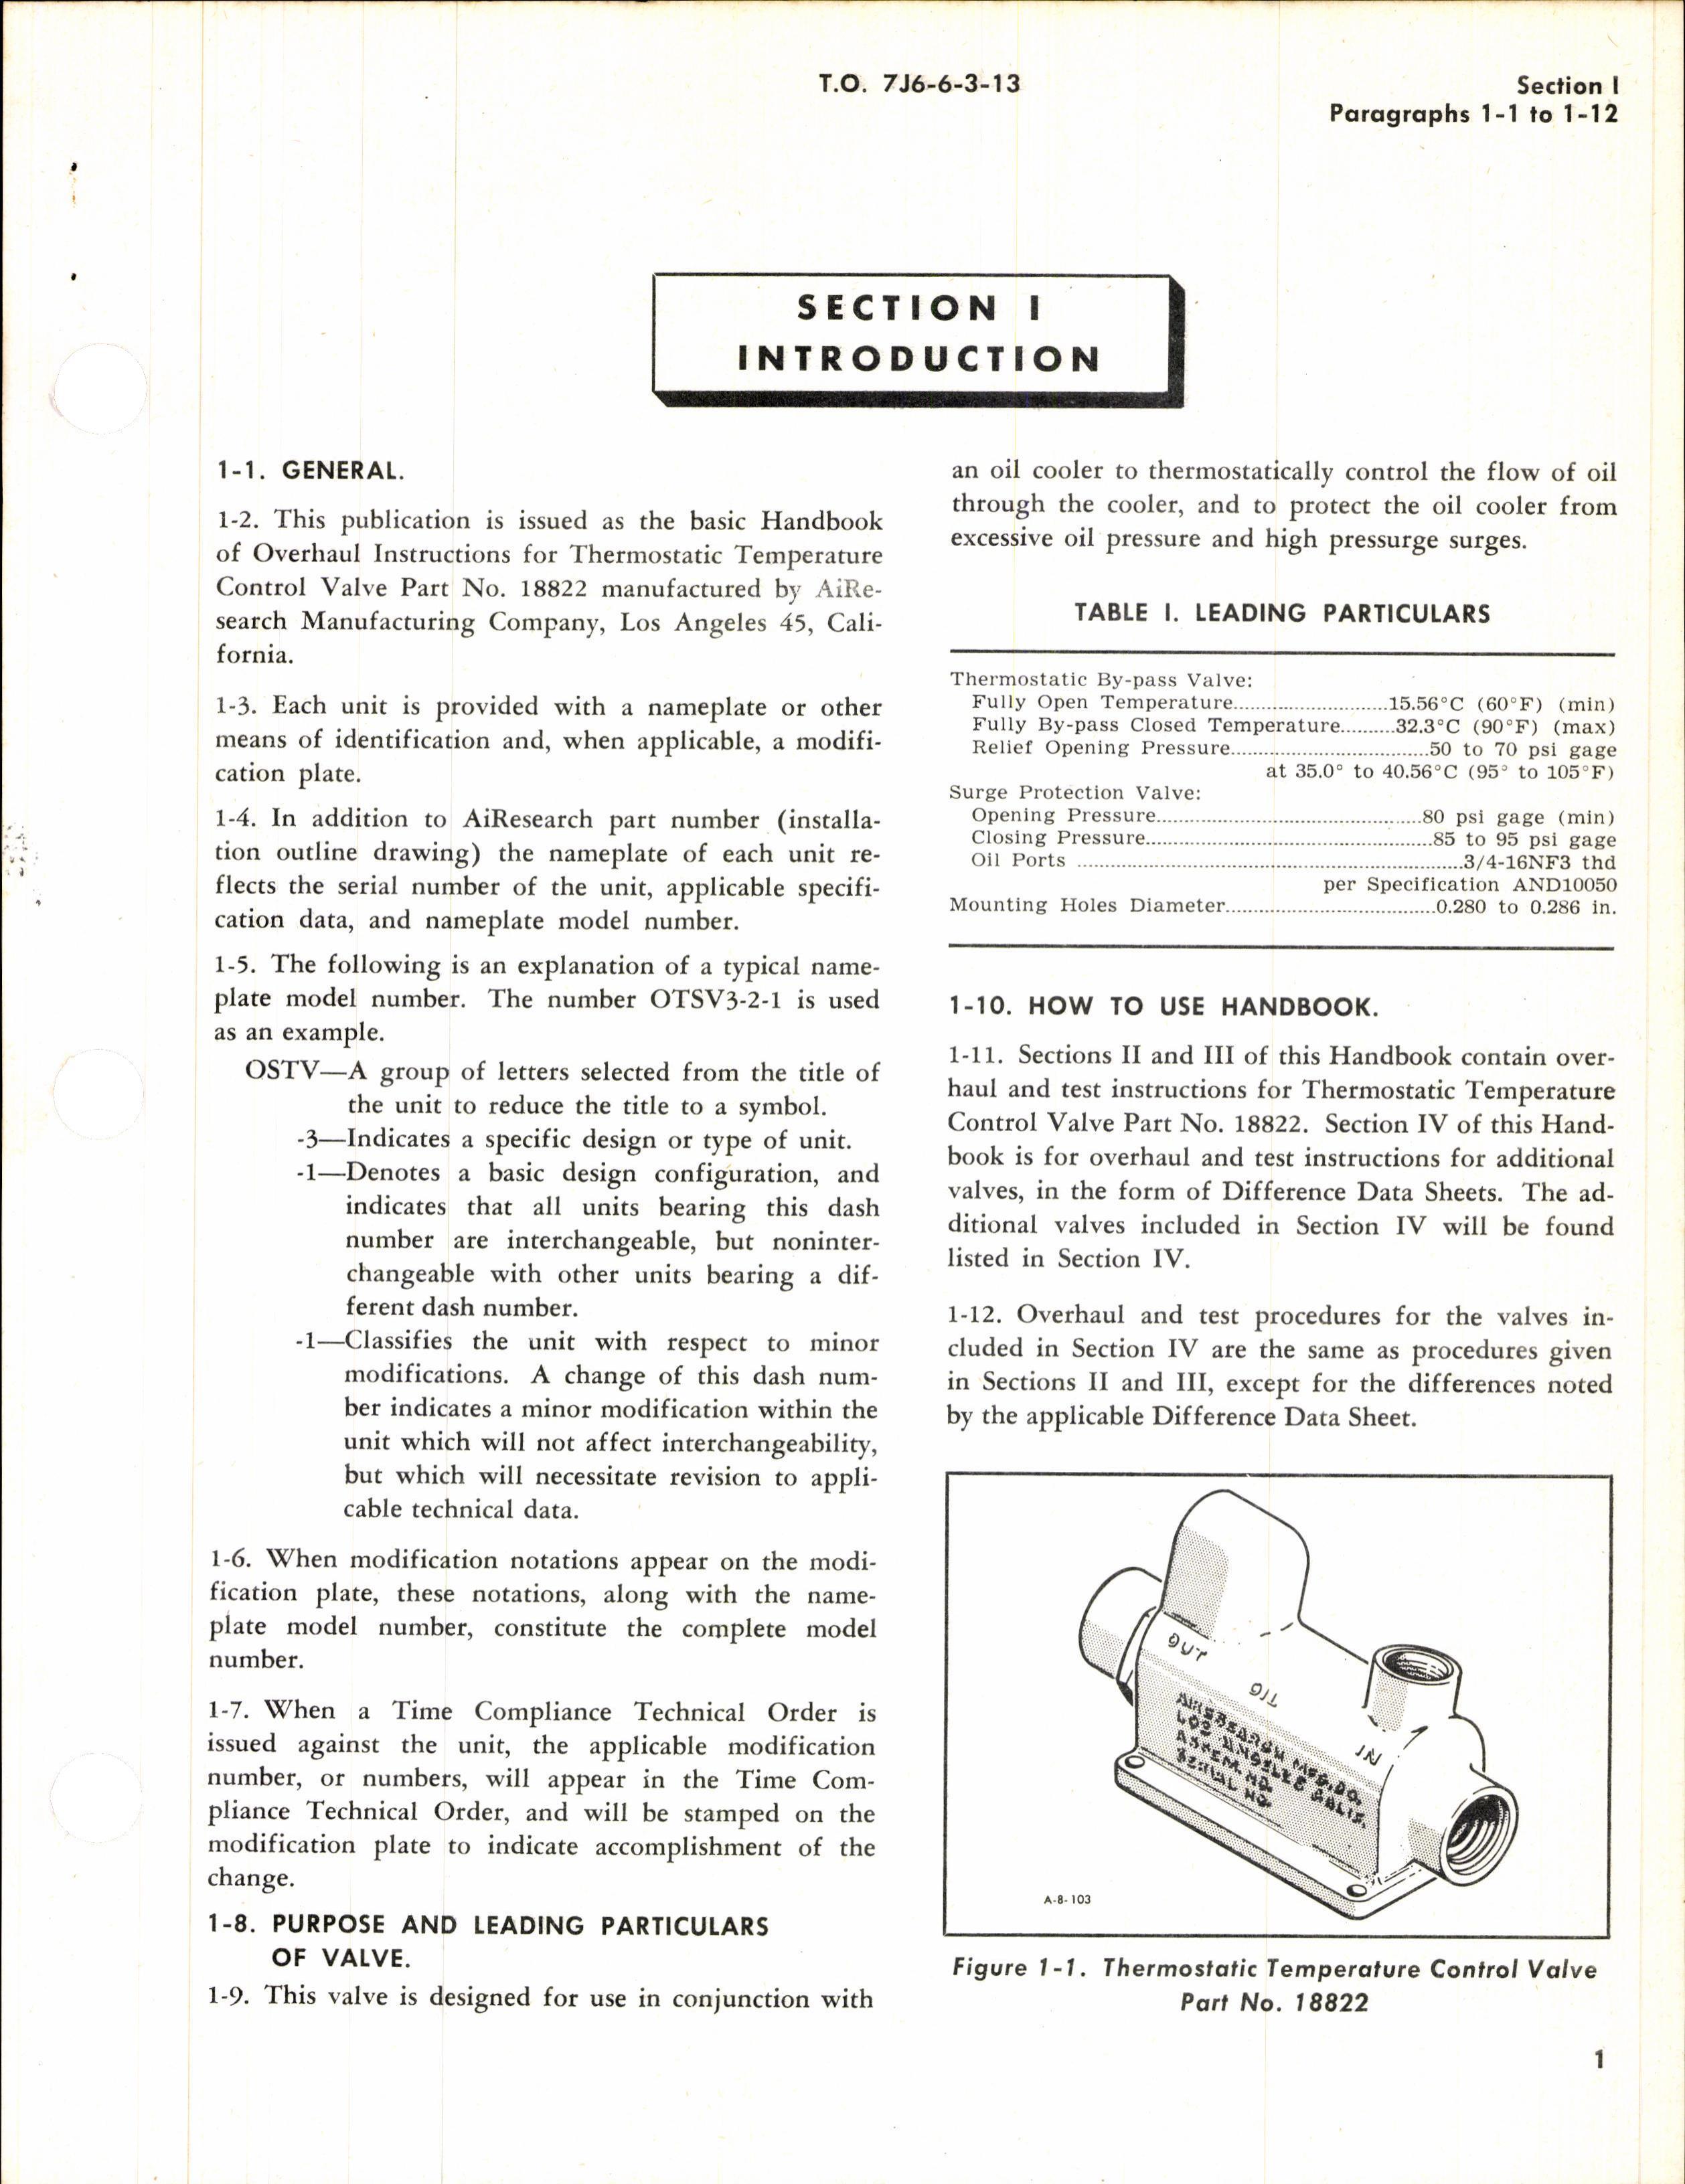 Sample page 3 from AirCorps Library document: Overhaul Instructions for Thermostatic Temperature Control Valves 